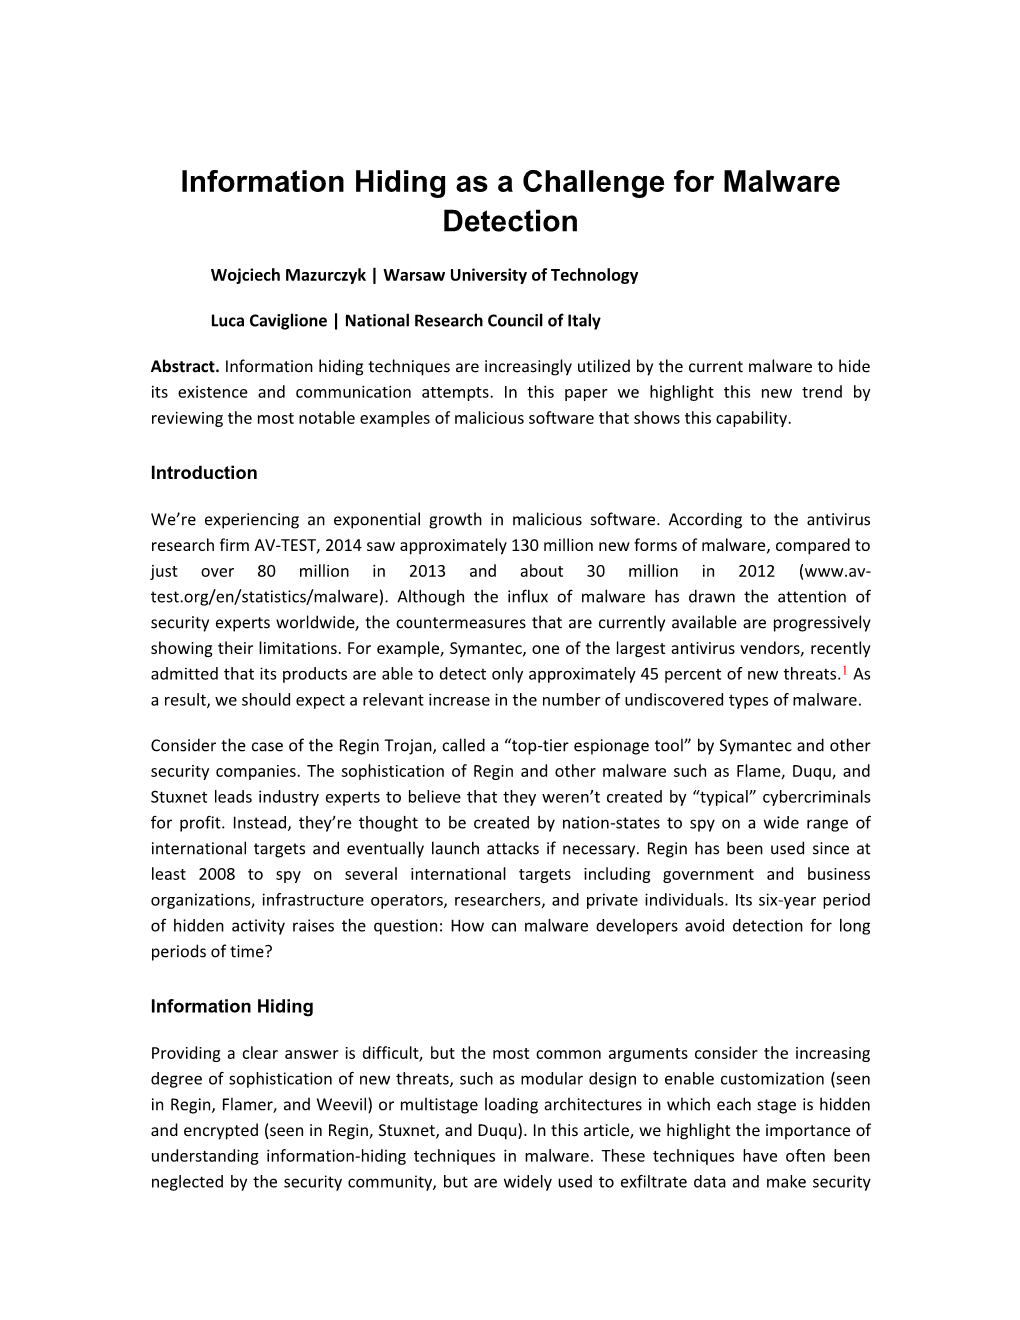 Information Hiding As a Challenge for Malware Detection